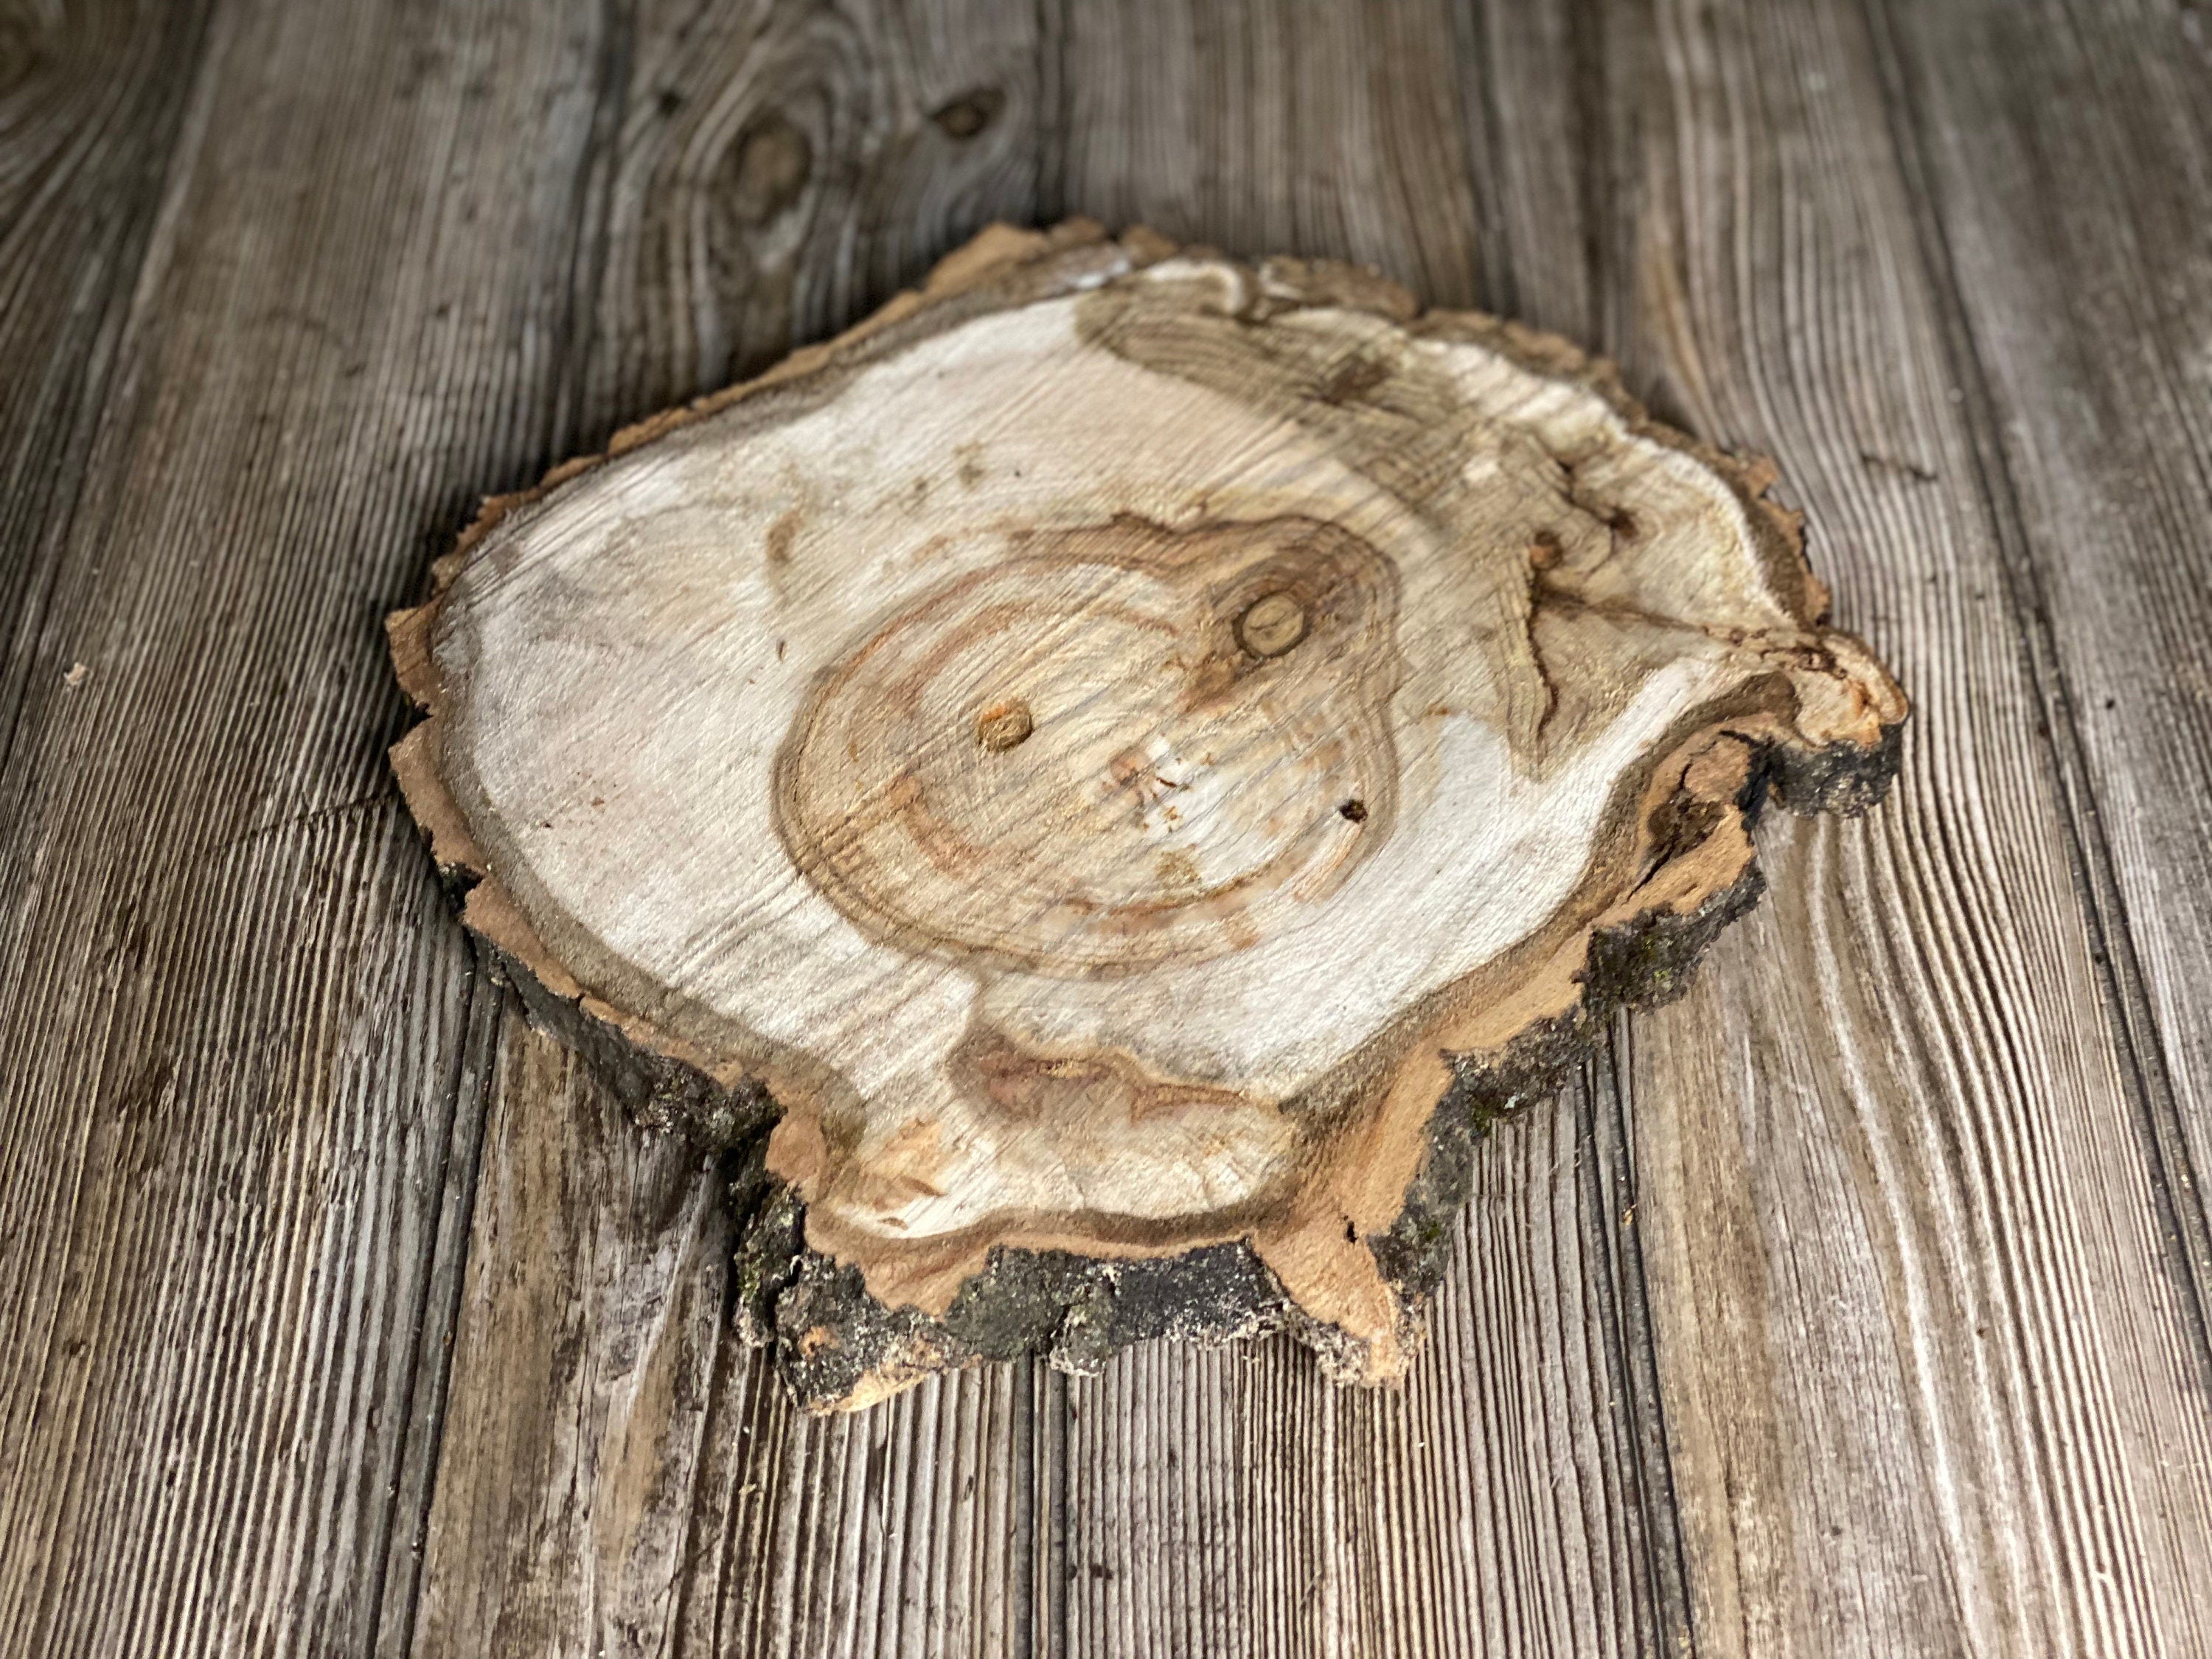 Aspen Burl Slice, Approximately 11.5 Inches Long by 11 Inches Wide and 3/4 Inch Thick